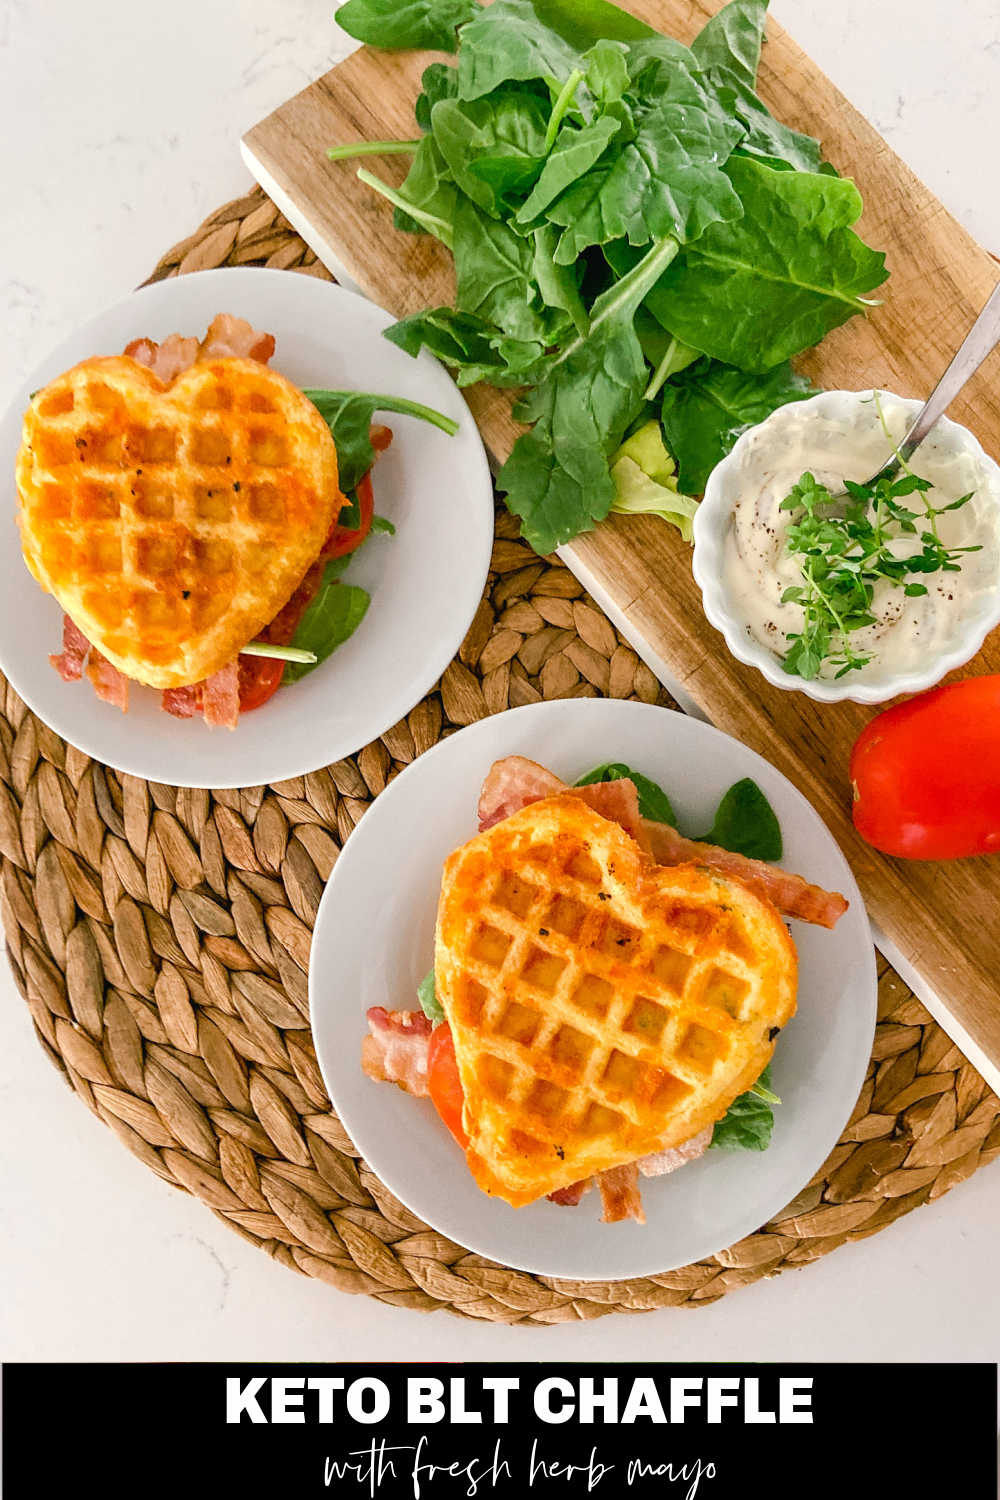 Chaffle BLT Sandwiches with Herb Mayo. Nothing's better in the summer than a fresh BLT. Stay on track with this low-carb, keto-friendly BLT! 